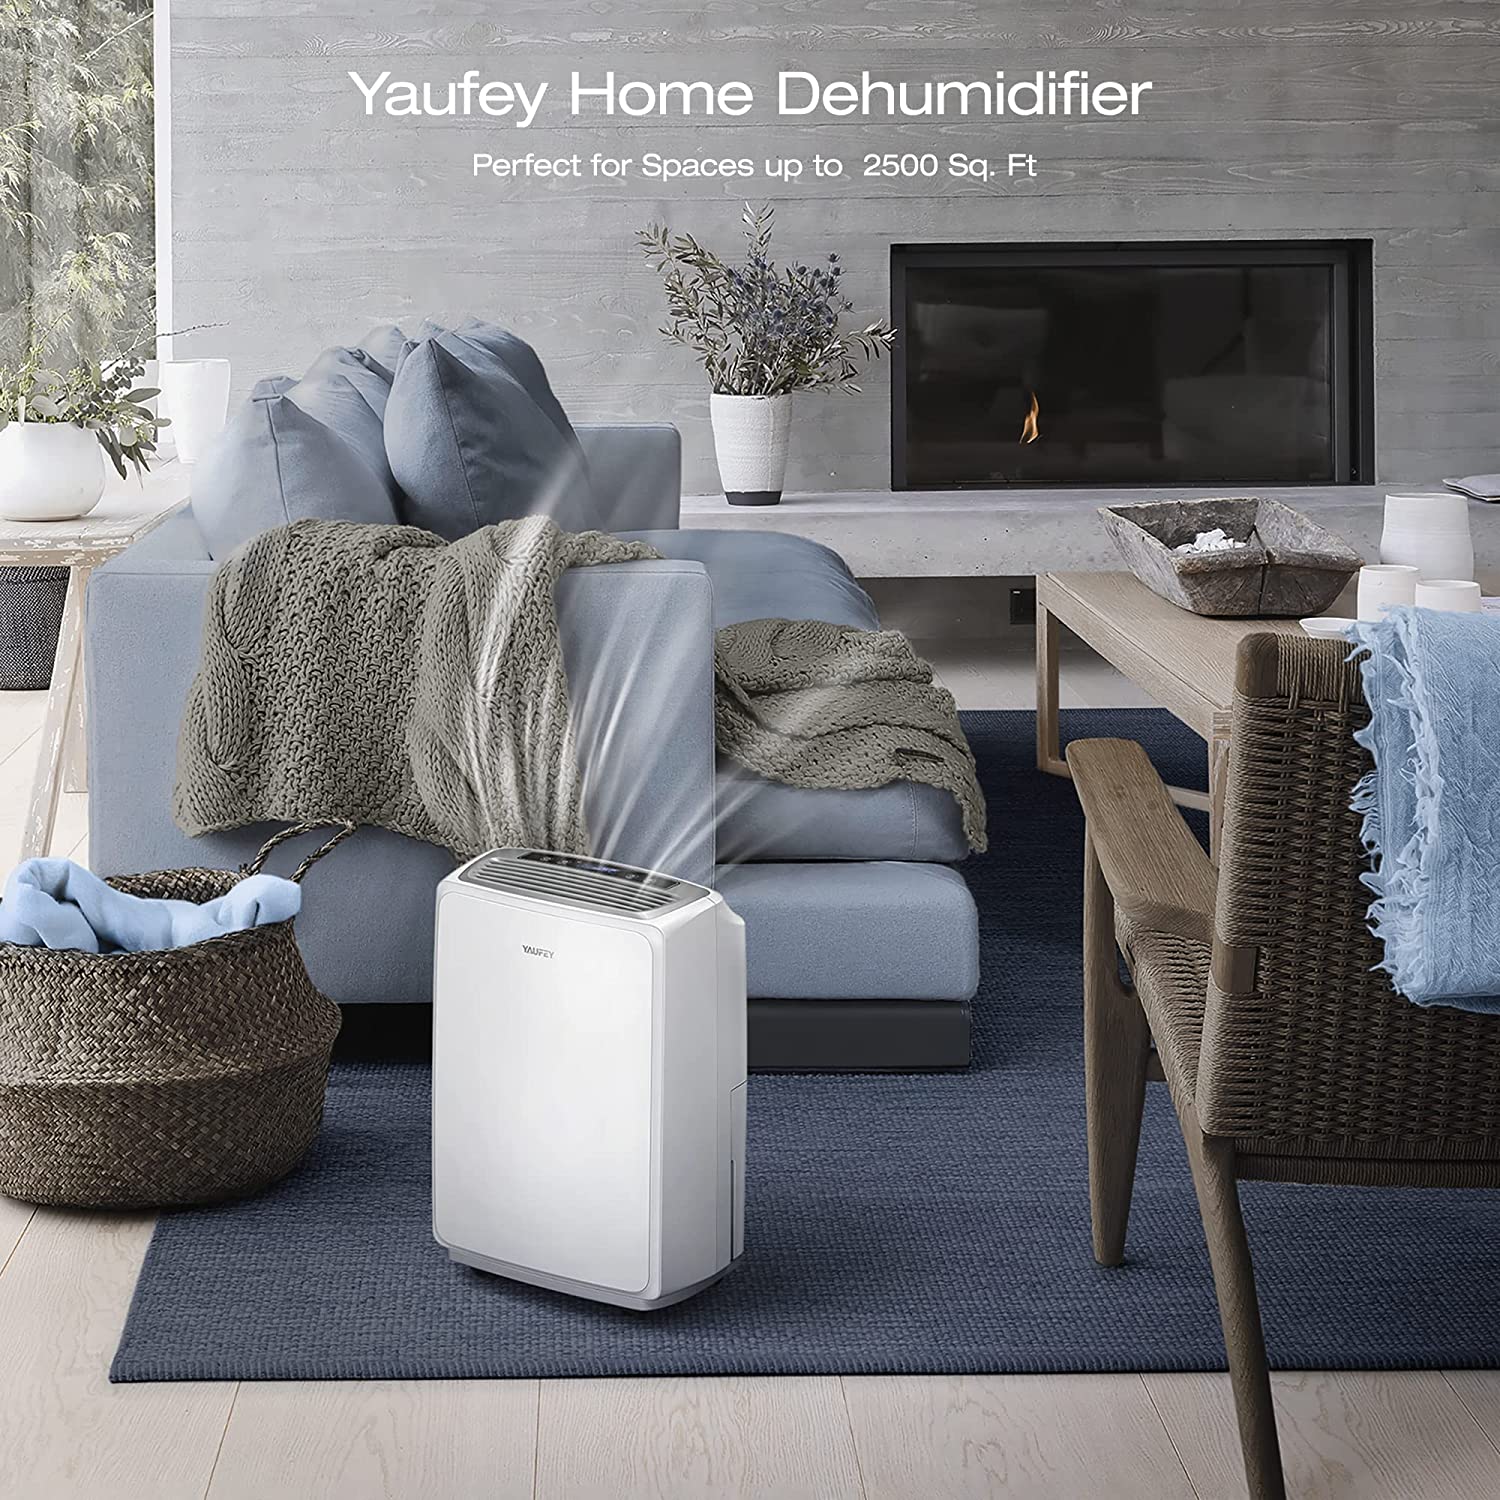 32.7 Pints Home Dehumidifier for Space  up to 2,500 Sq. Ft (Model: HD163A)